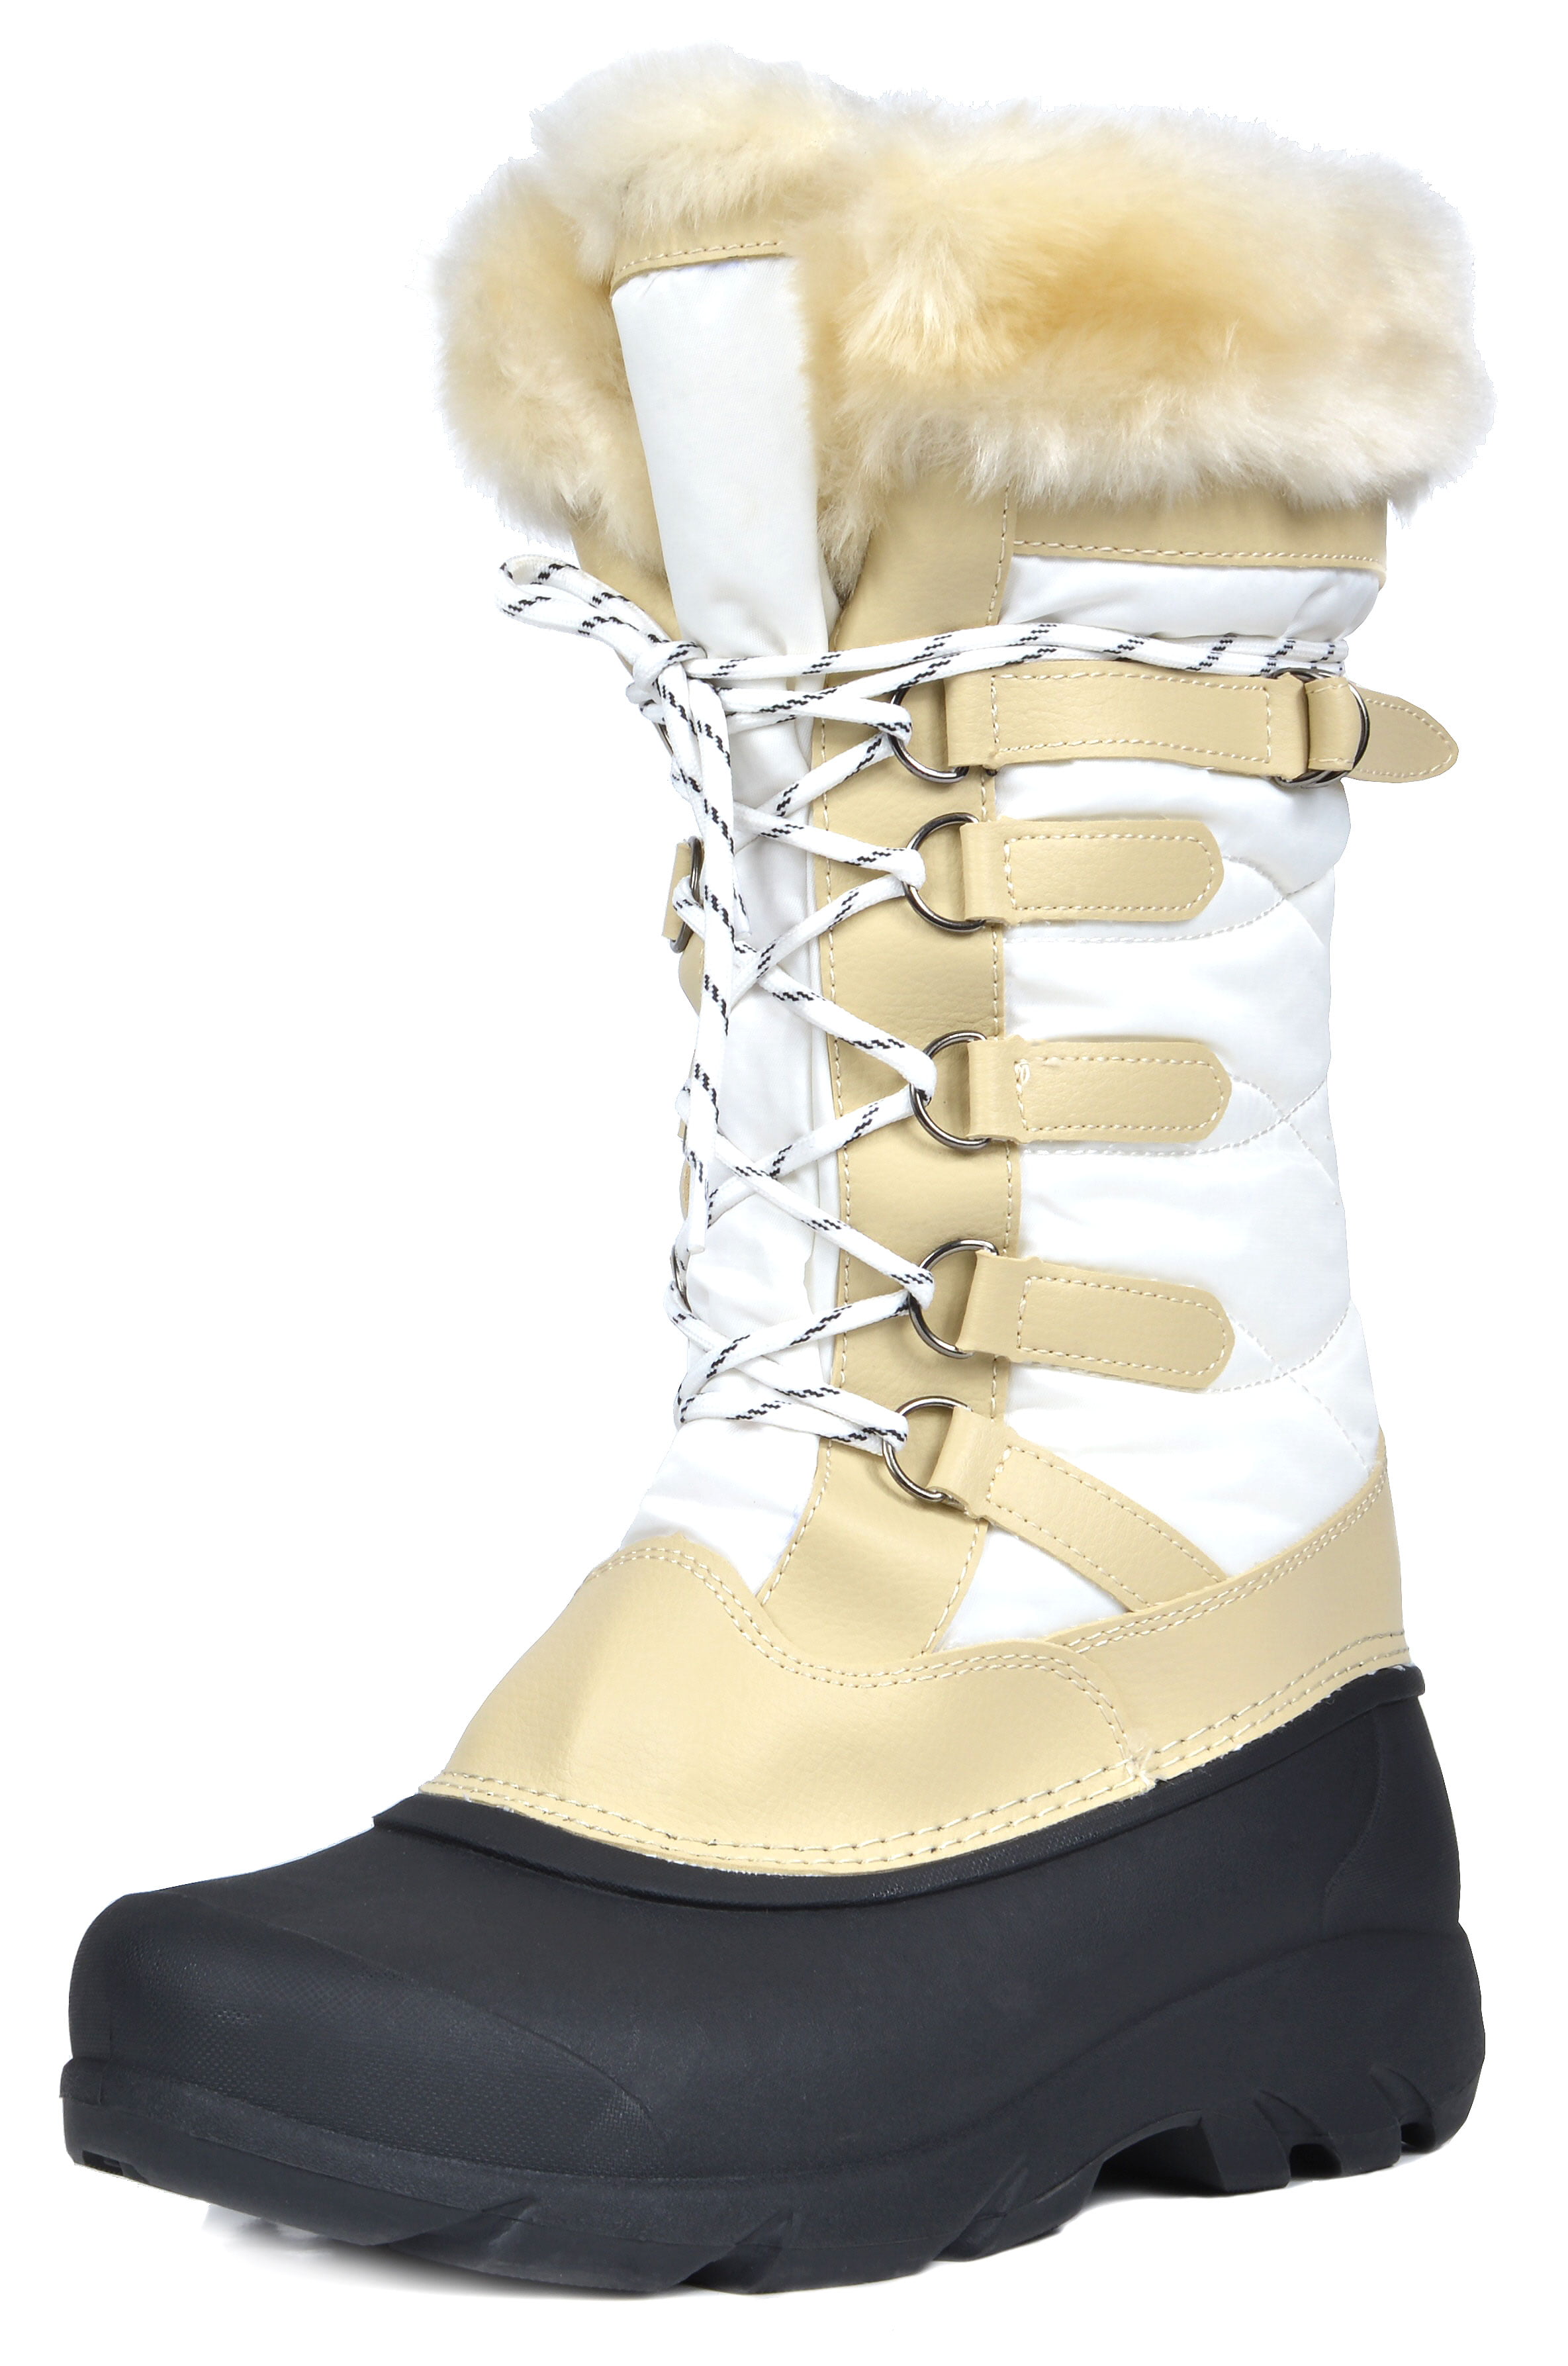 New Womens Winter Warm Wedge hidden Faux Suede Fur Lining Calf Boots Shoes Snow